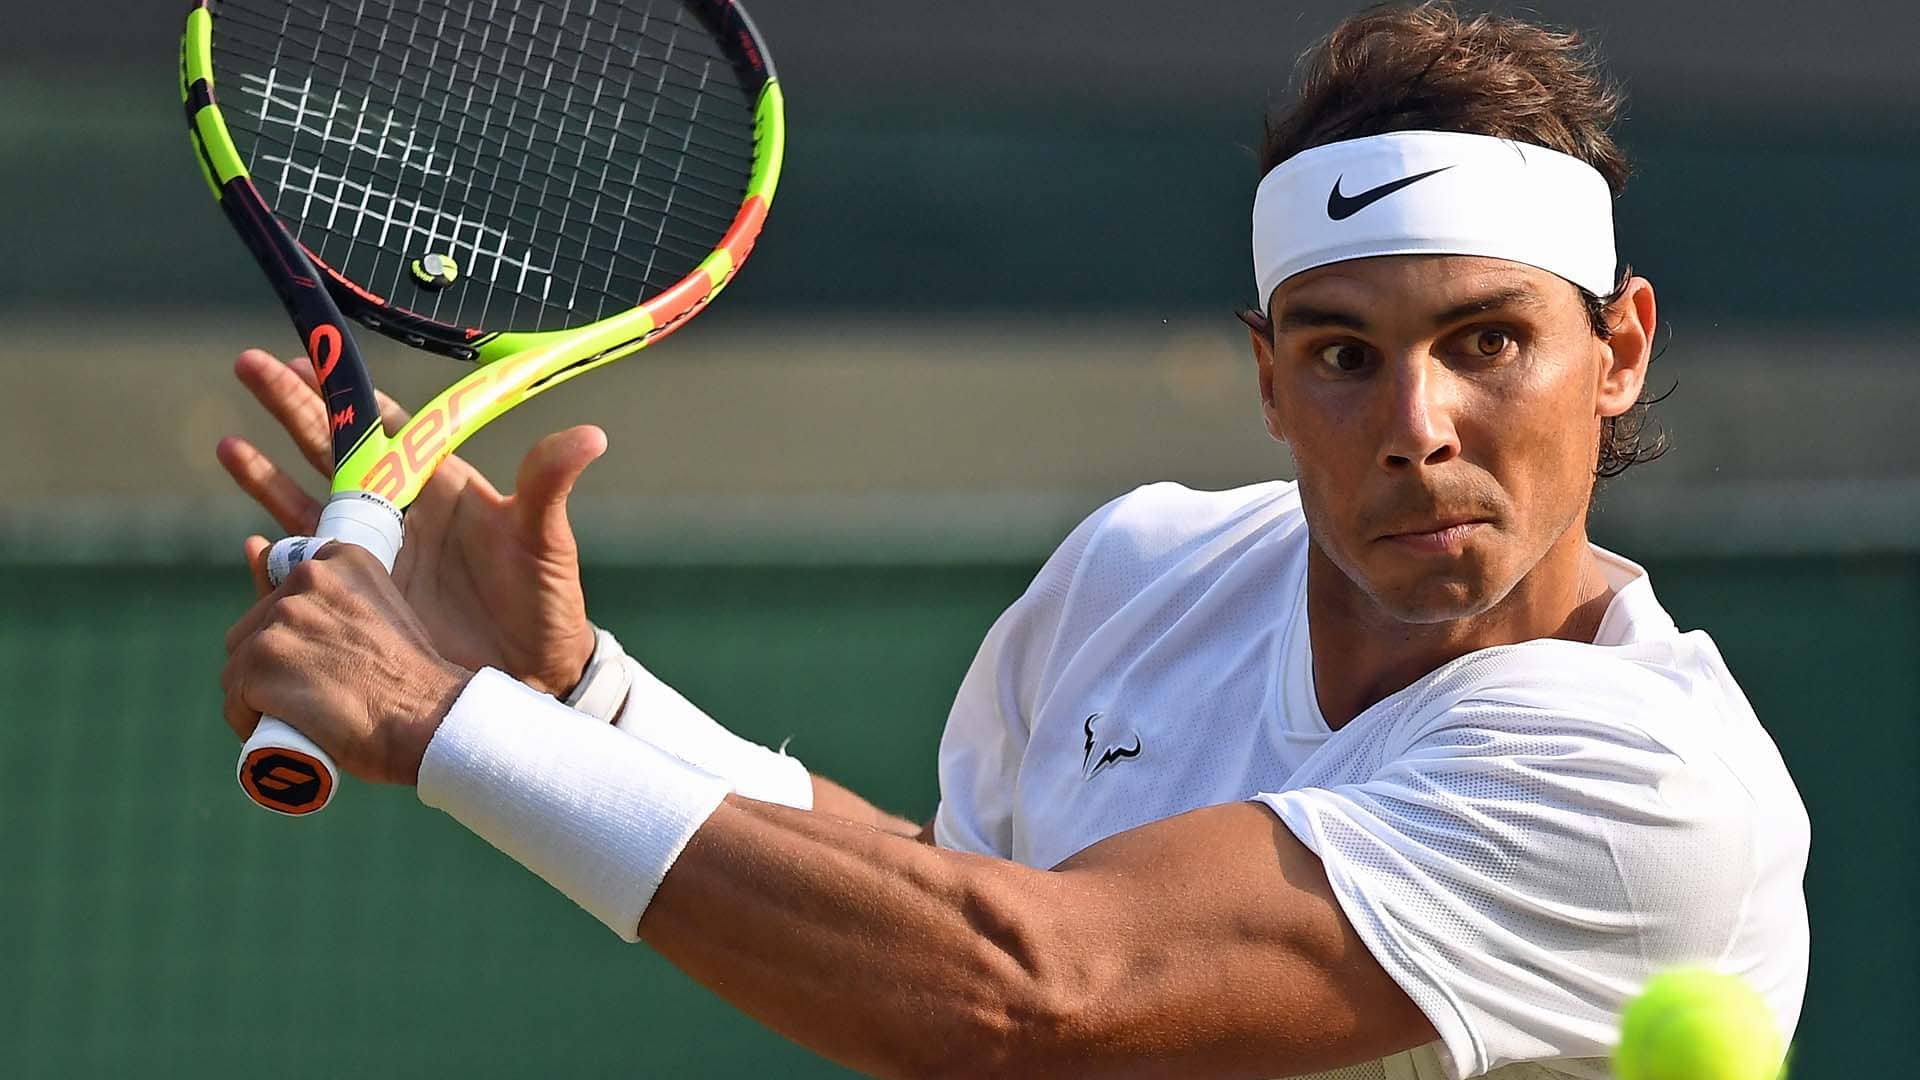 Rafael Nadal, a two-time champion, has withdrawn from this year's Wimbledon.